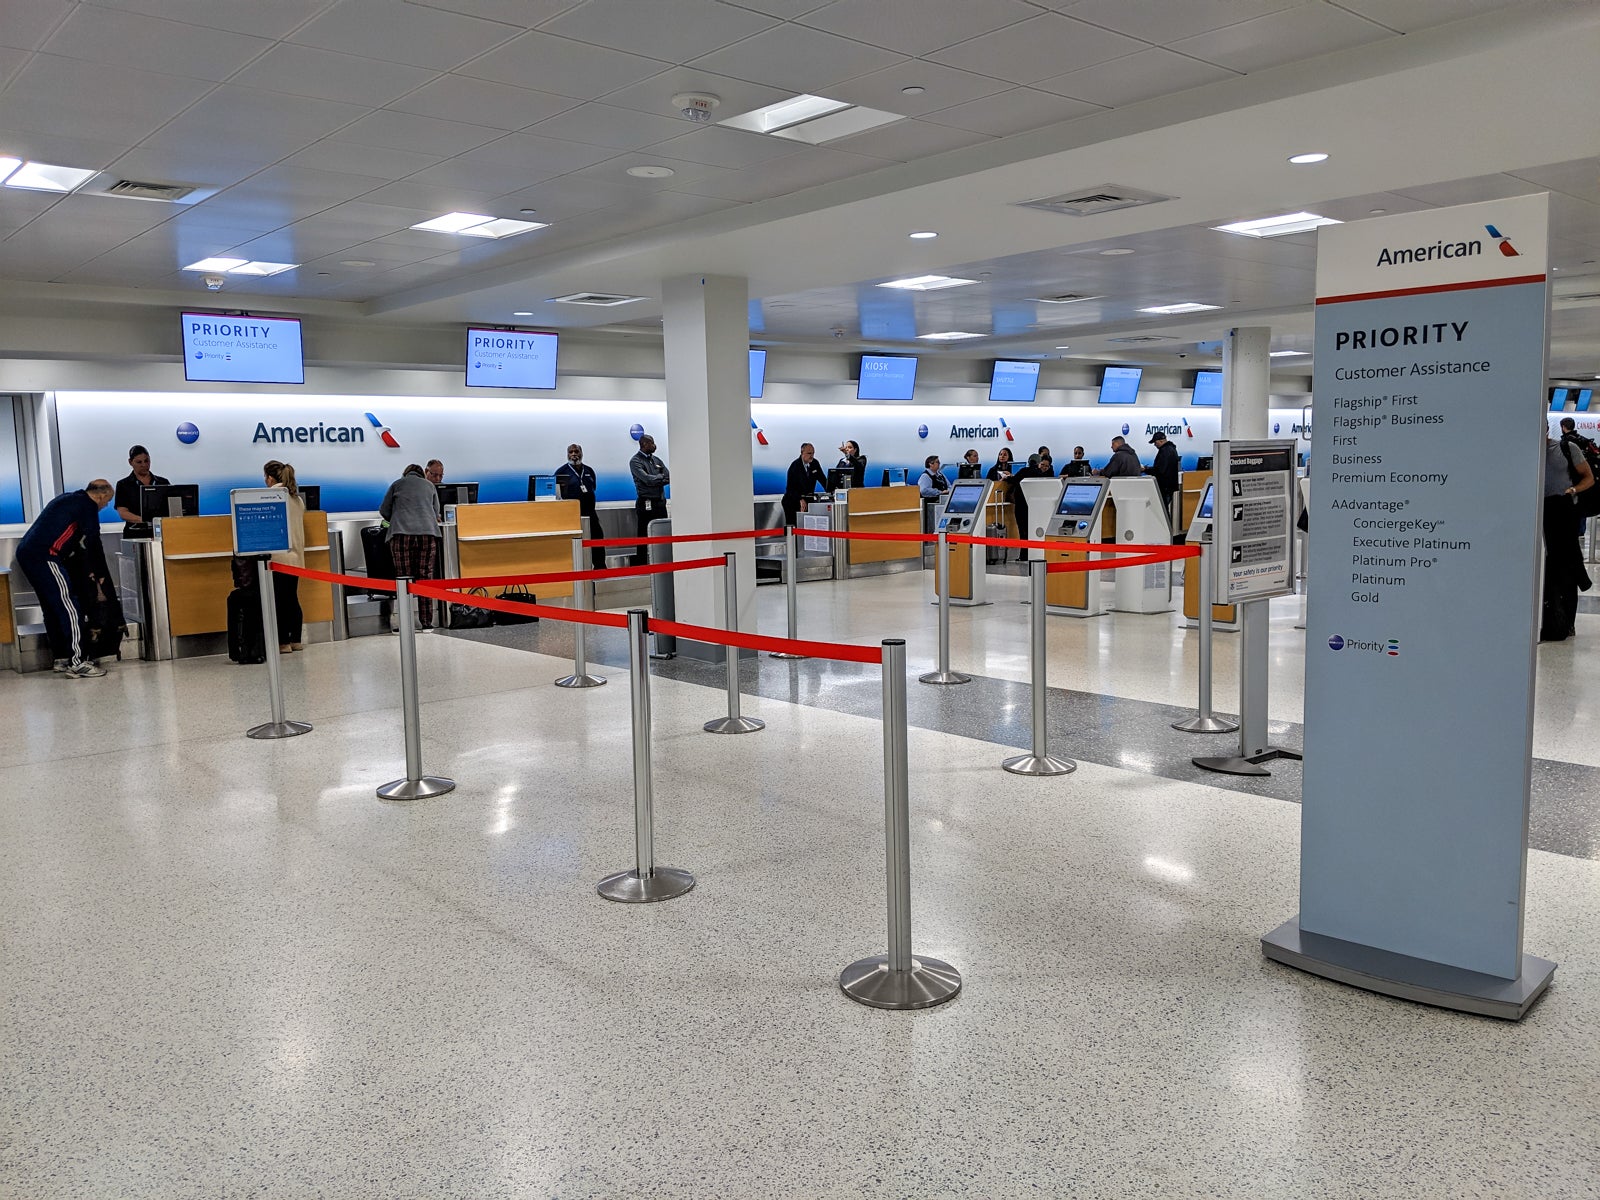 A typical priority check-in line, as found in Boston International Airport.